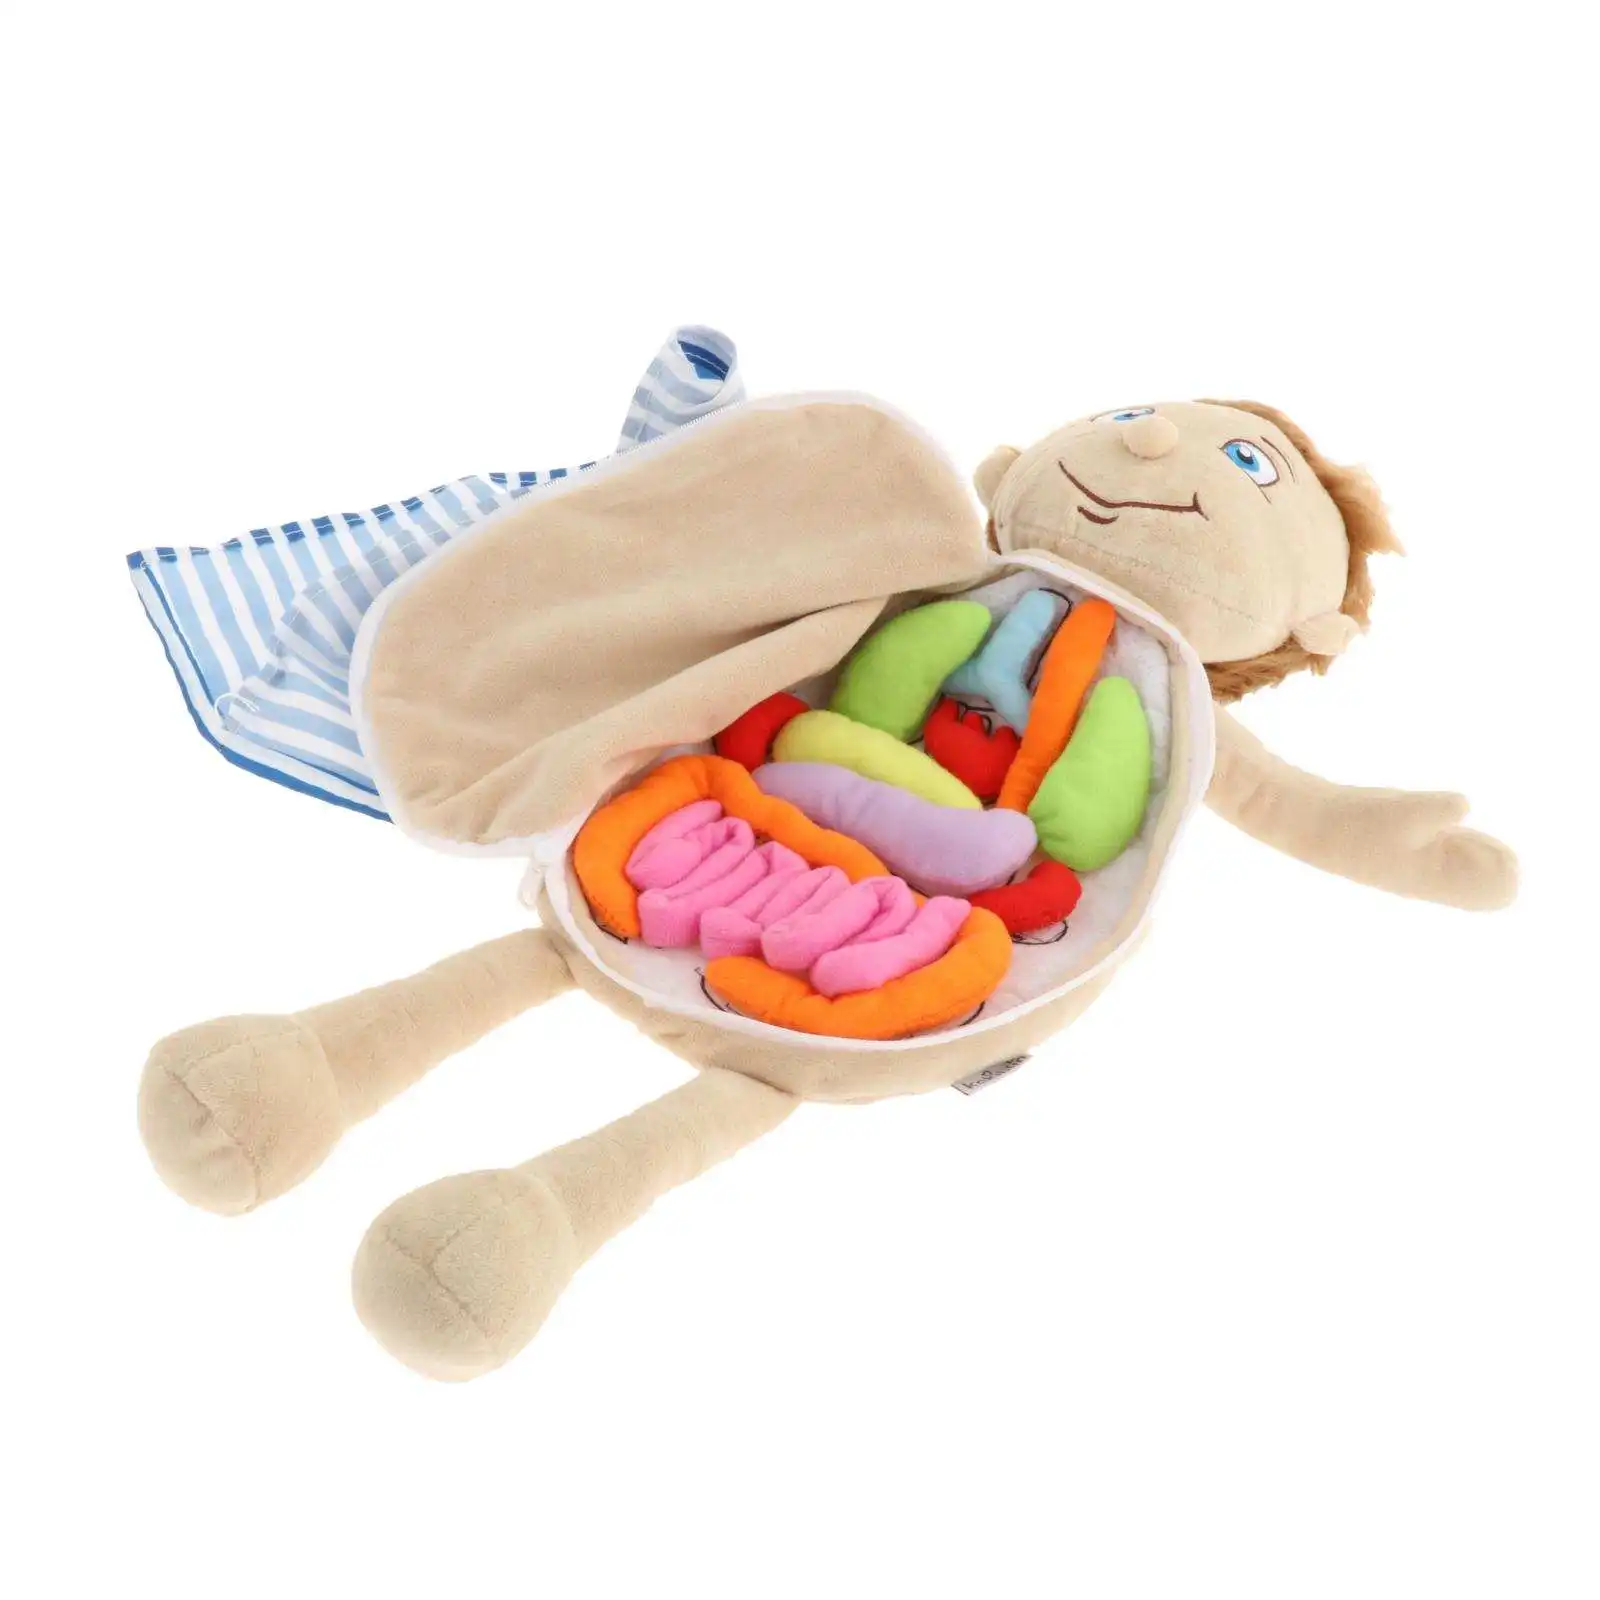 Human Body Anatomy Toy, 3D Puzzle Removable Organ Toy Early Education Toys for Children